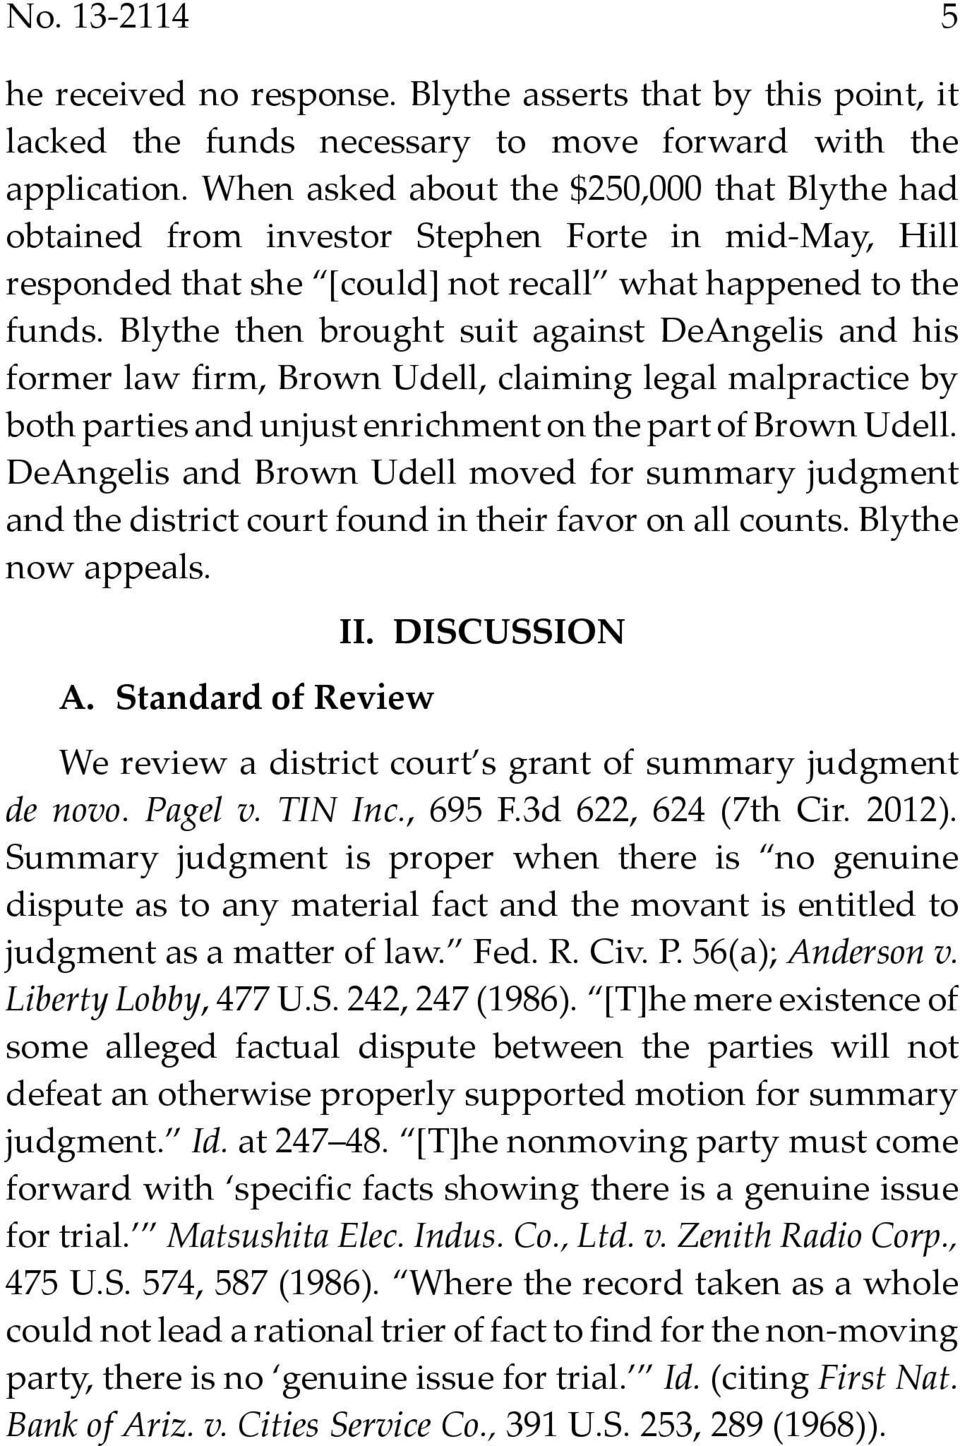 Blythe then brought suit against DeAngelis and his former law firm, Brown Udell, claiming legal malpractice by both parties and unjust enrichment on the part of Brown Udell.